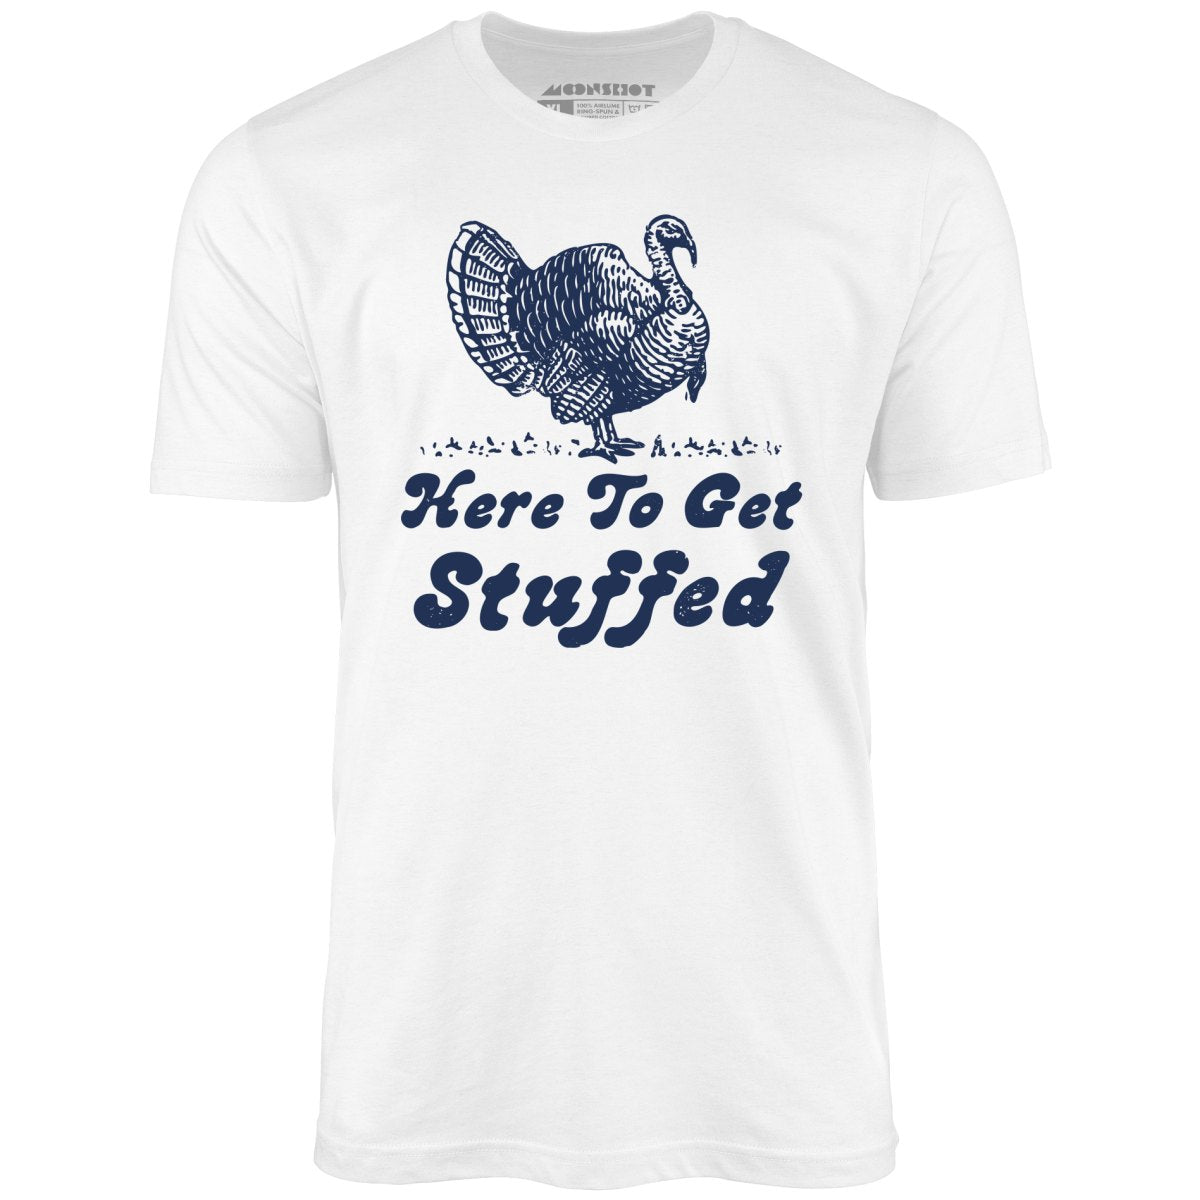 Here to Get Stuffed - Unisex T-Shirt